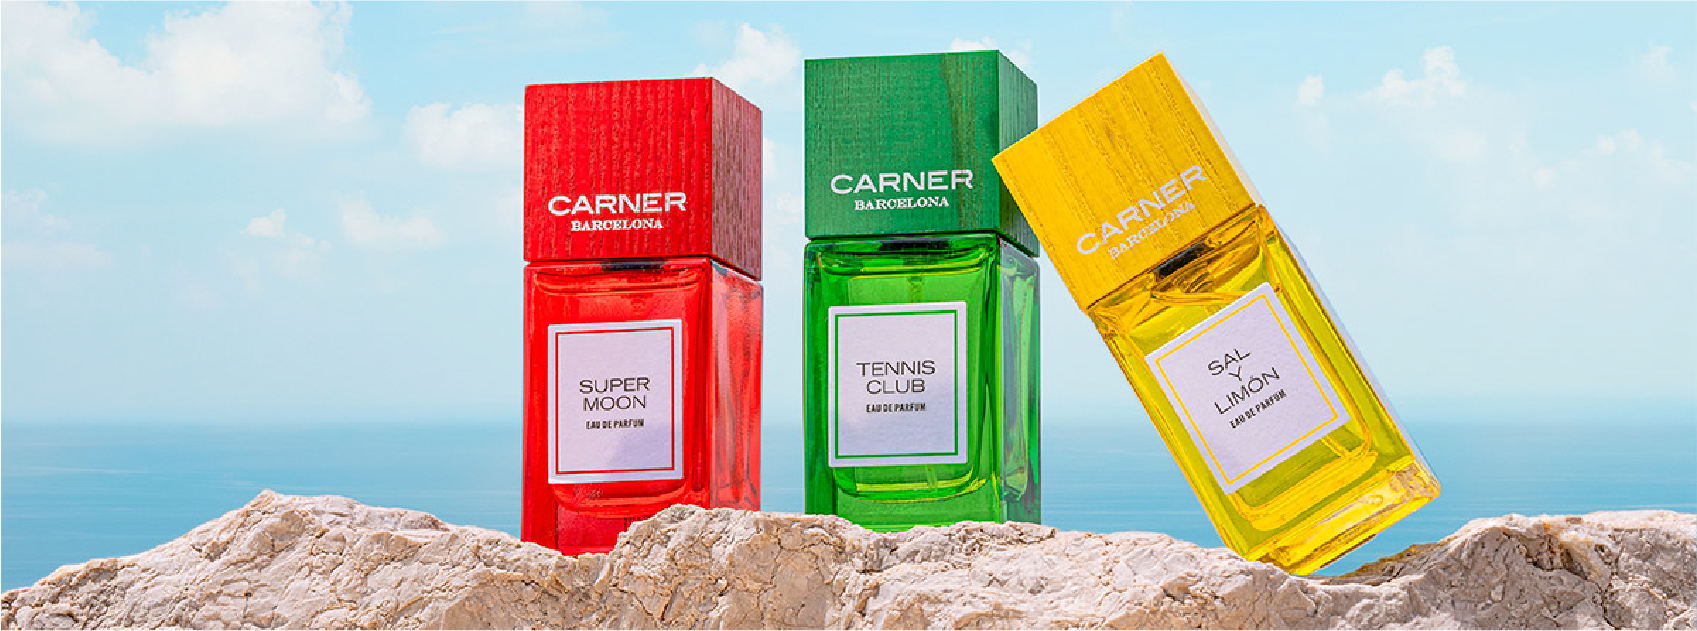 three bottles of fragrances - super moon, tennis club, sal l limon from the summer series by carner barcelona